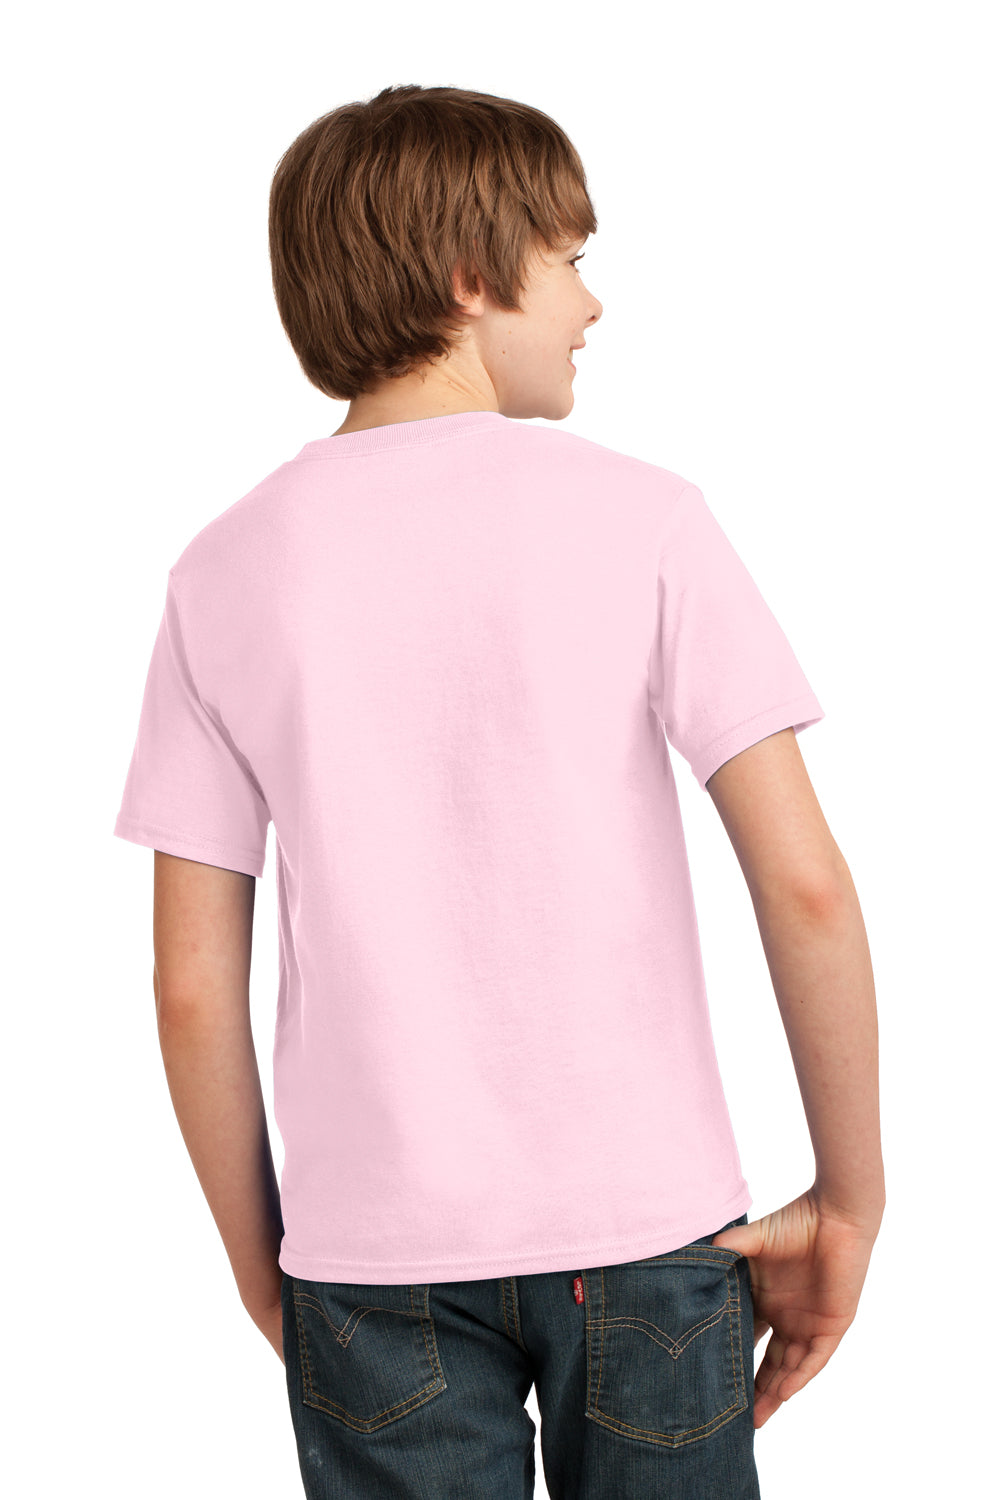 Port & Company PC61Y Youth Essential Short Sleeve Crewneck T-Shirt Pale Pink Back